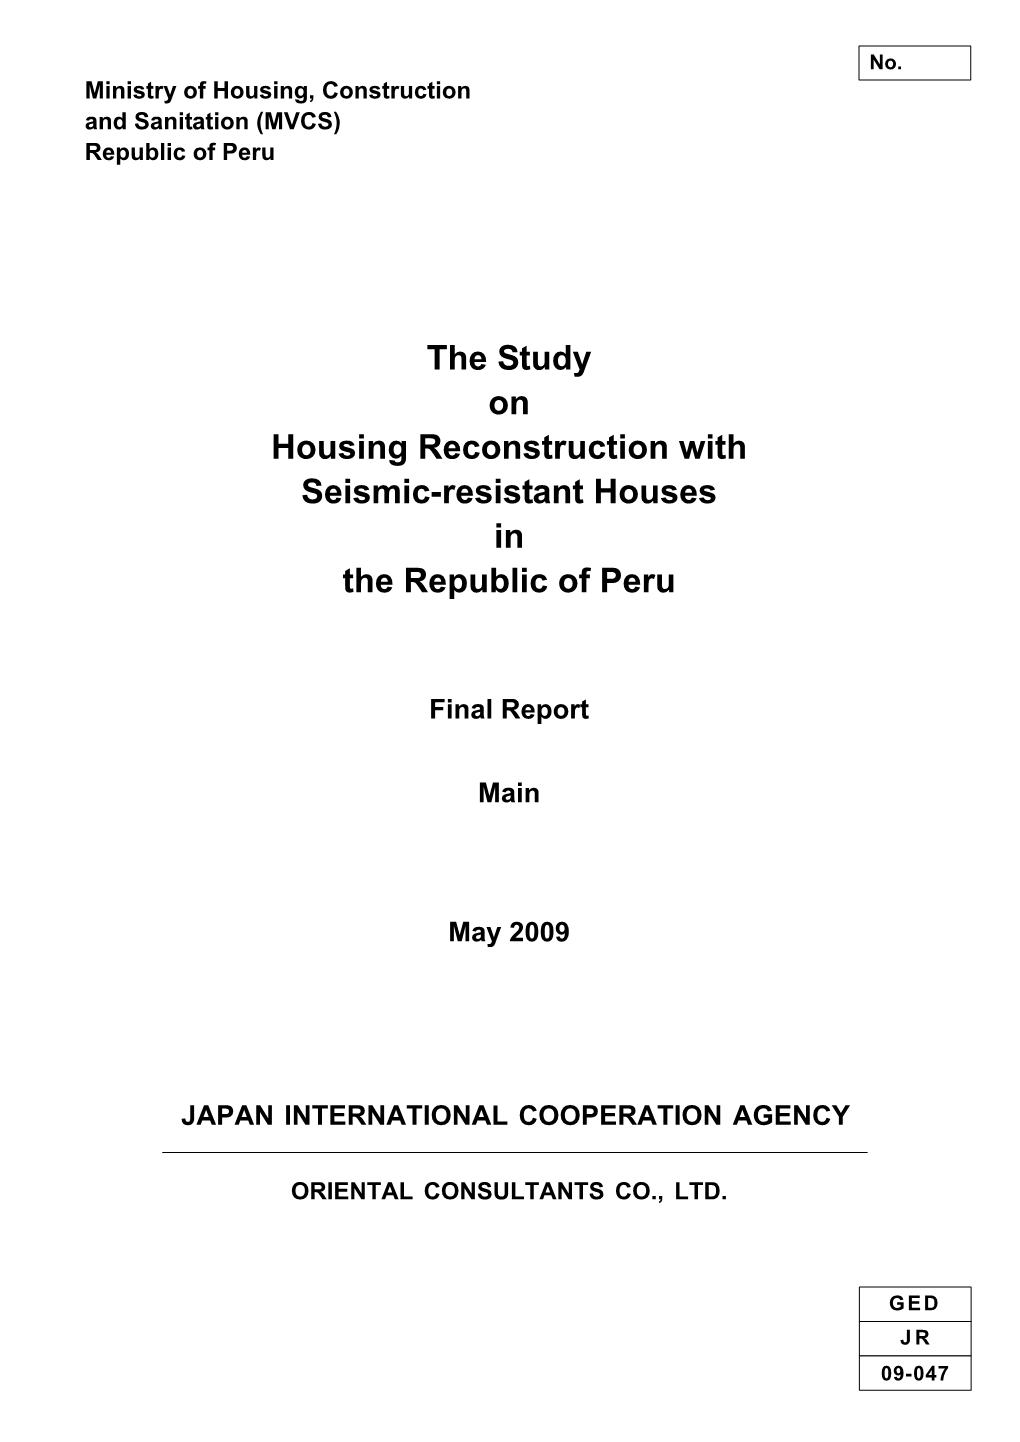 The Study on Housing Reconstruction with Seismic-Resistant Houses in the Republic of Peru